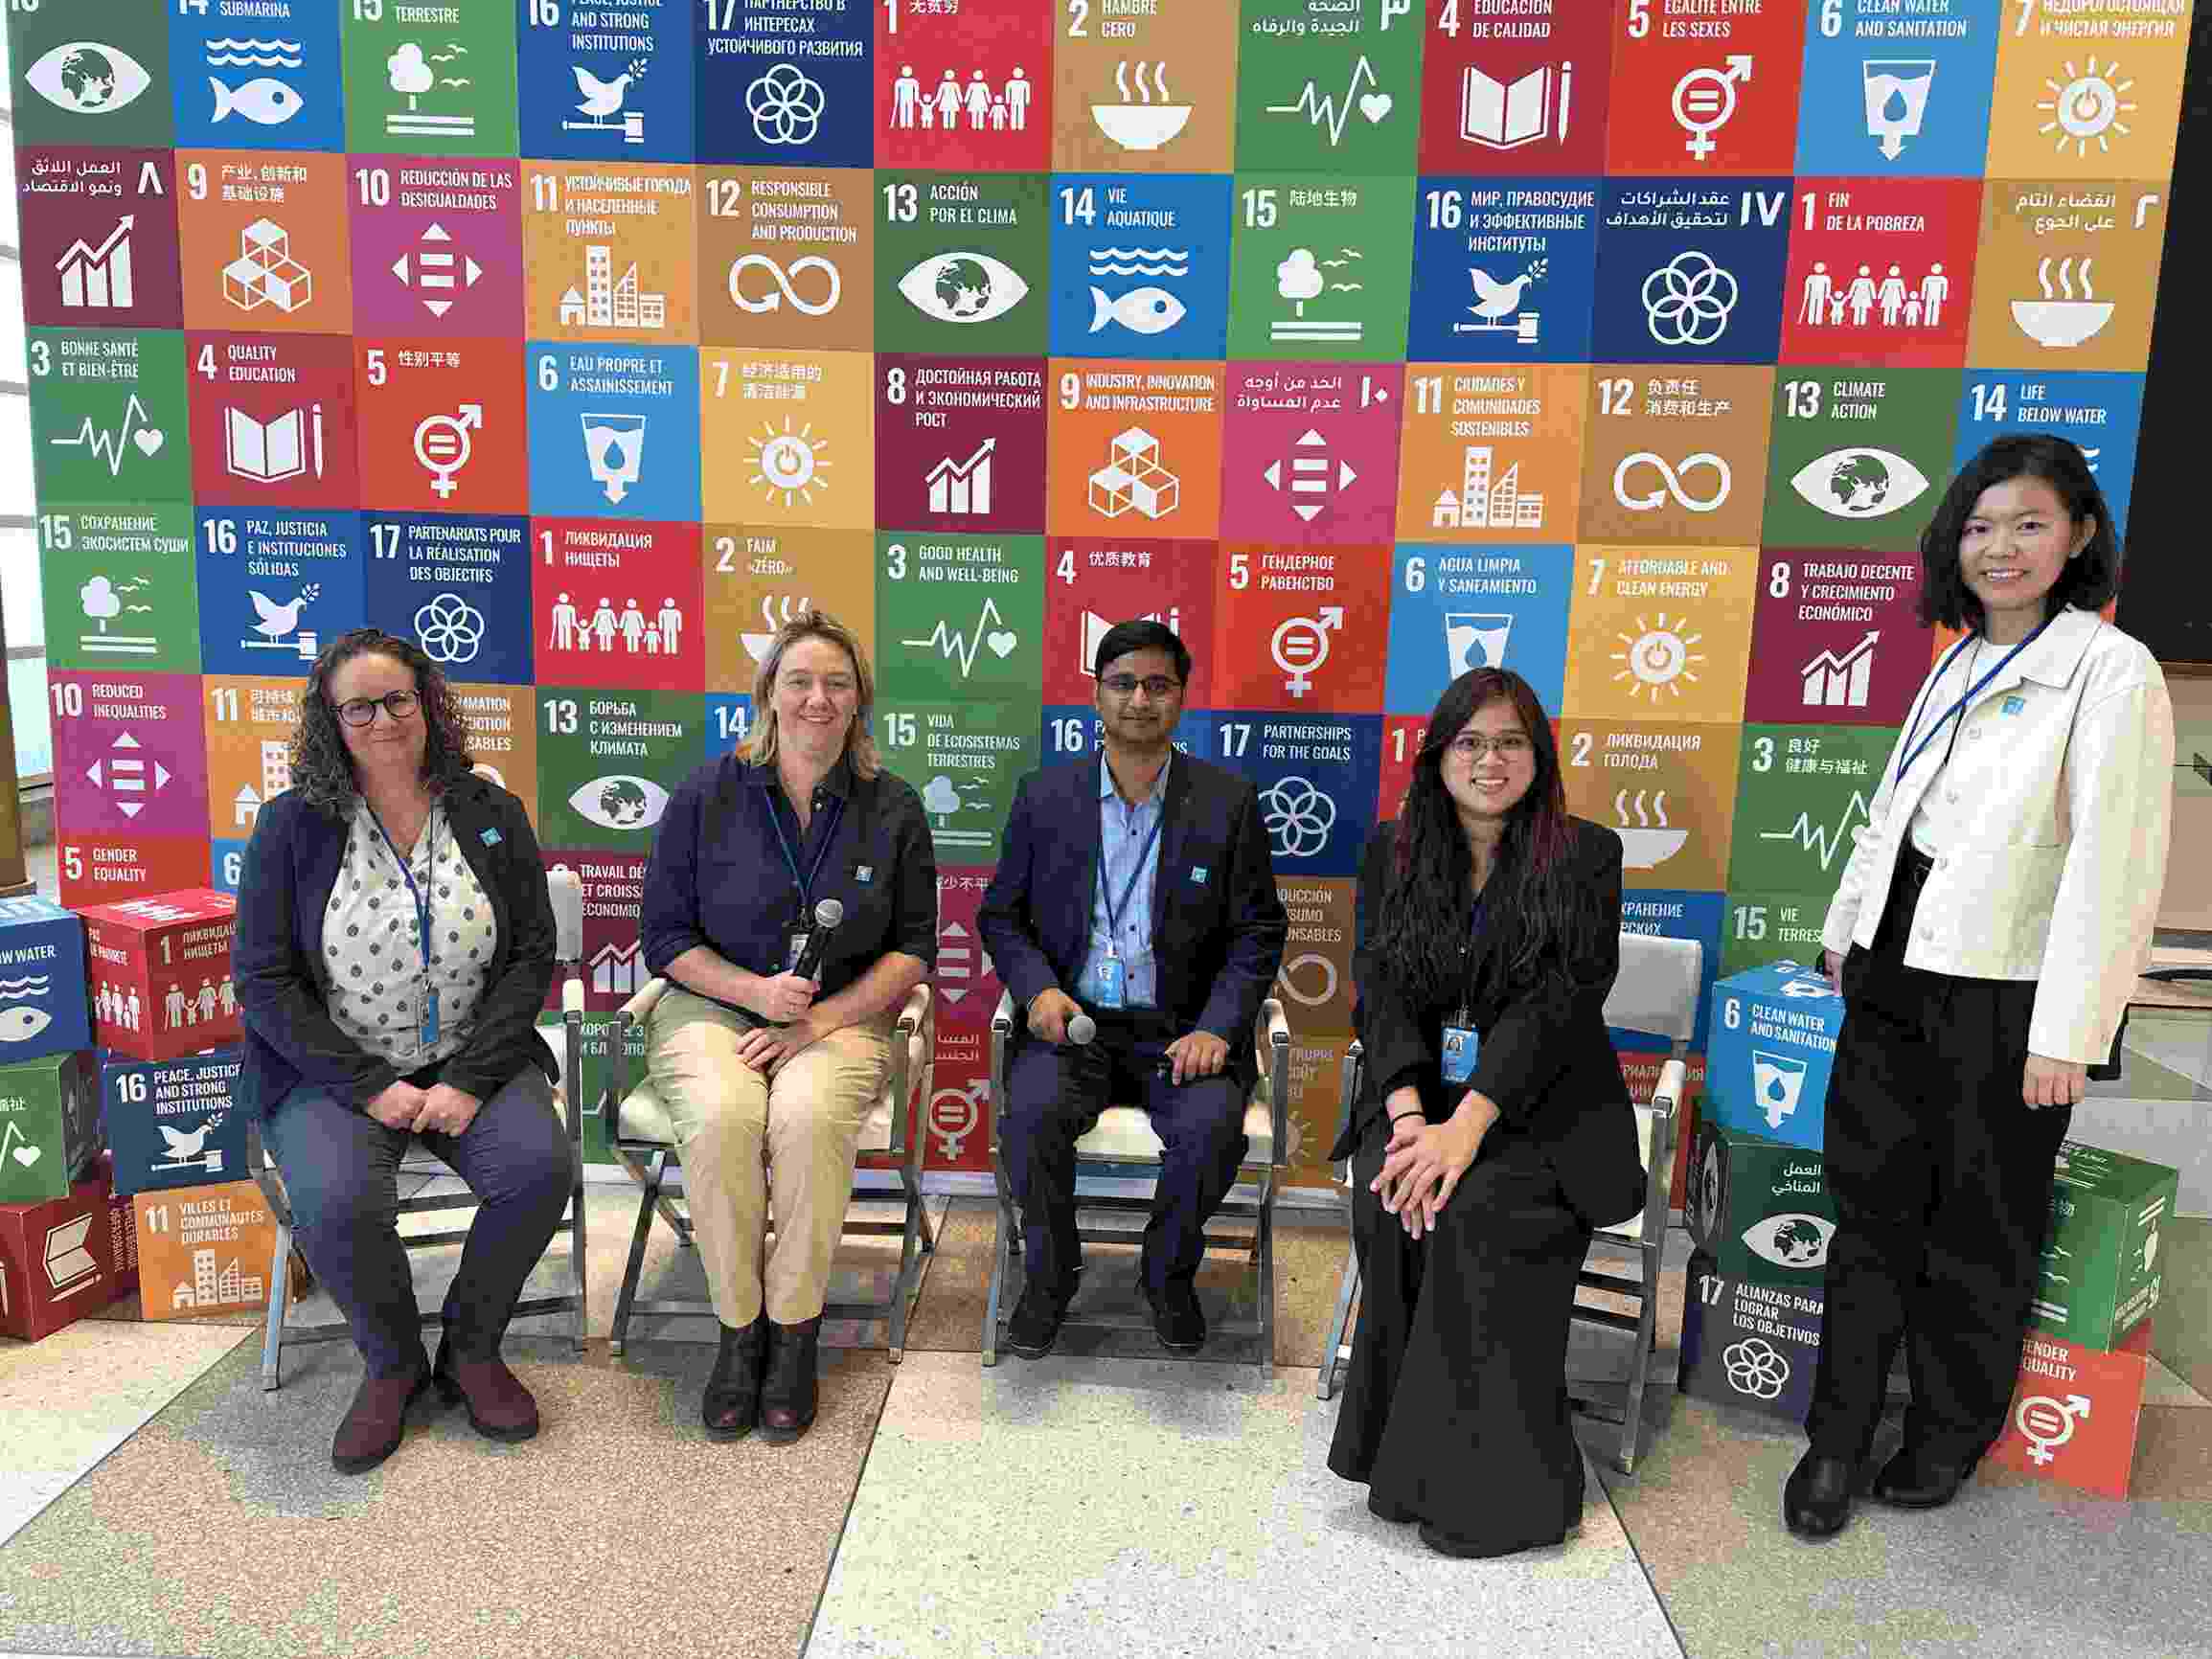 Five Hub members sit and stand together in front of a backdrop of the SDG logos